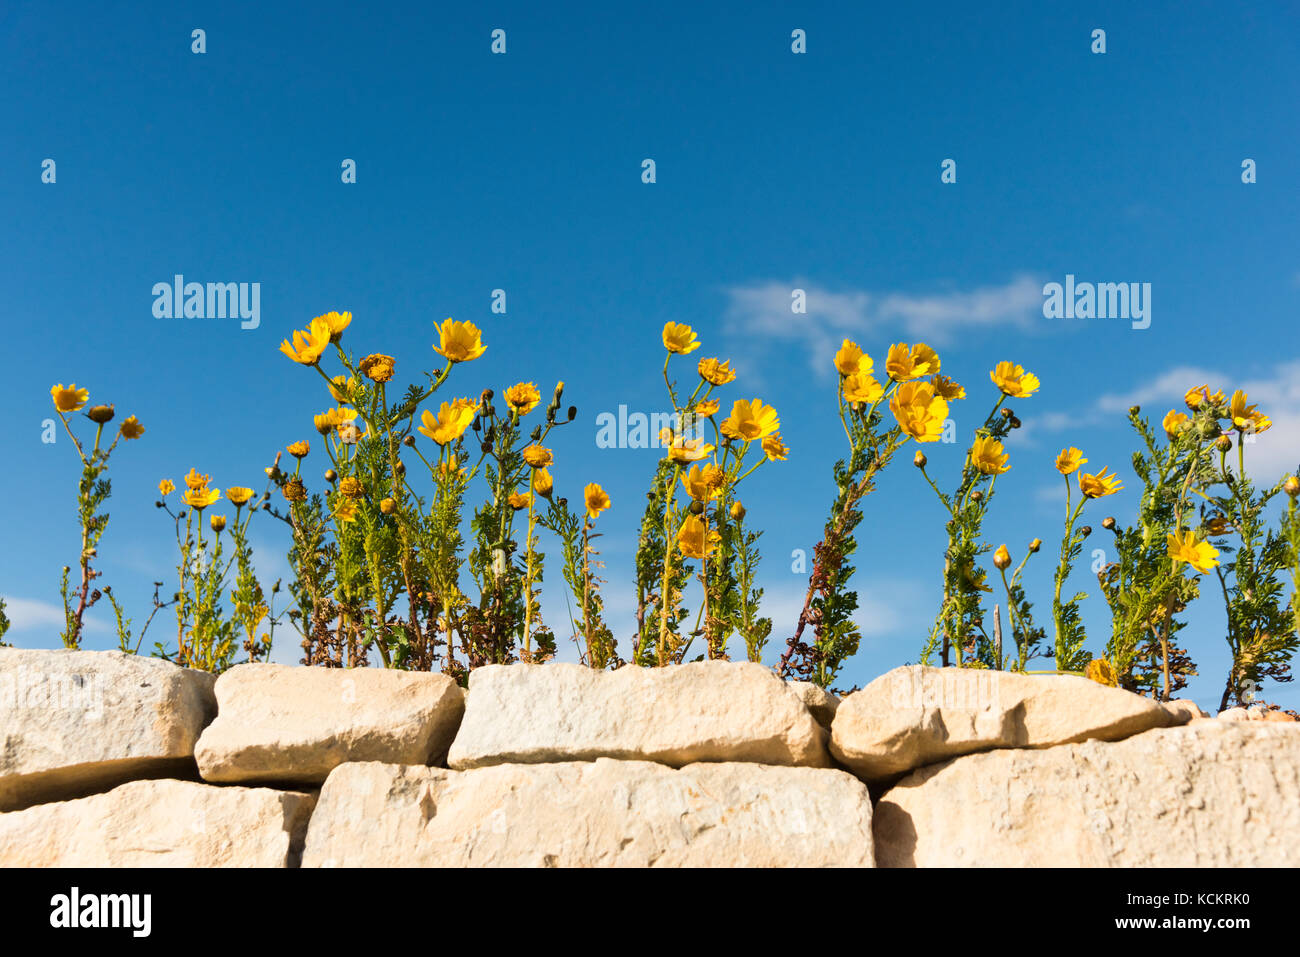 Maltese Marigolds or Yellow wild flowers growing on a stone wall in rural Malta against a blue sky in summer Stock Photo